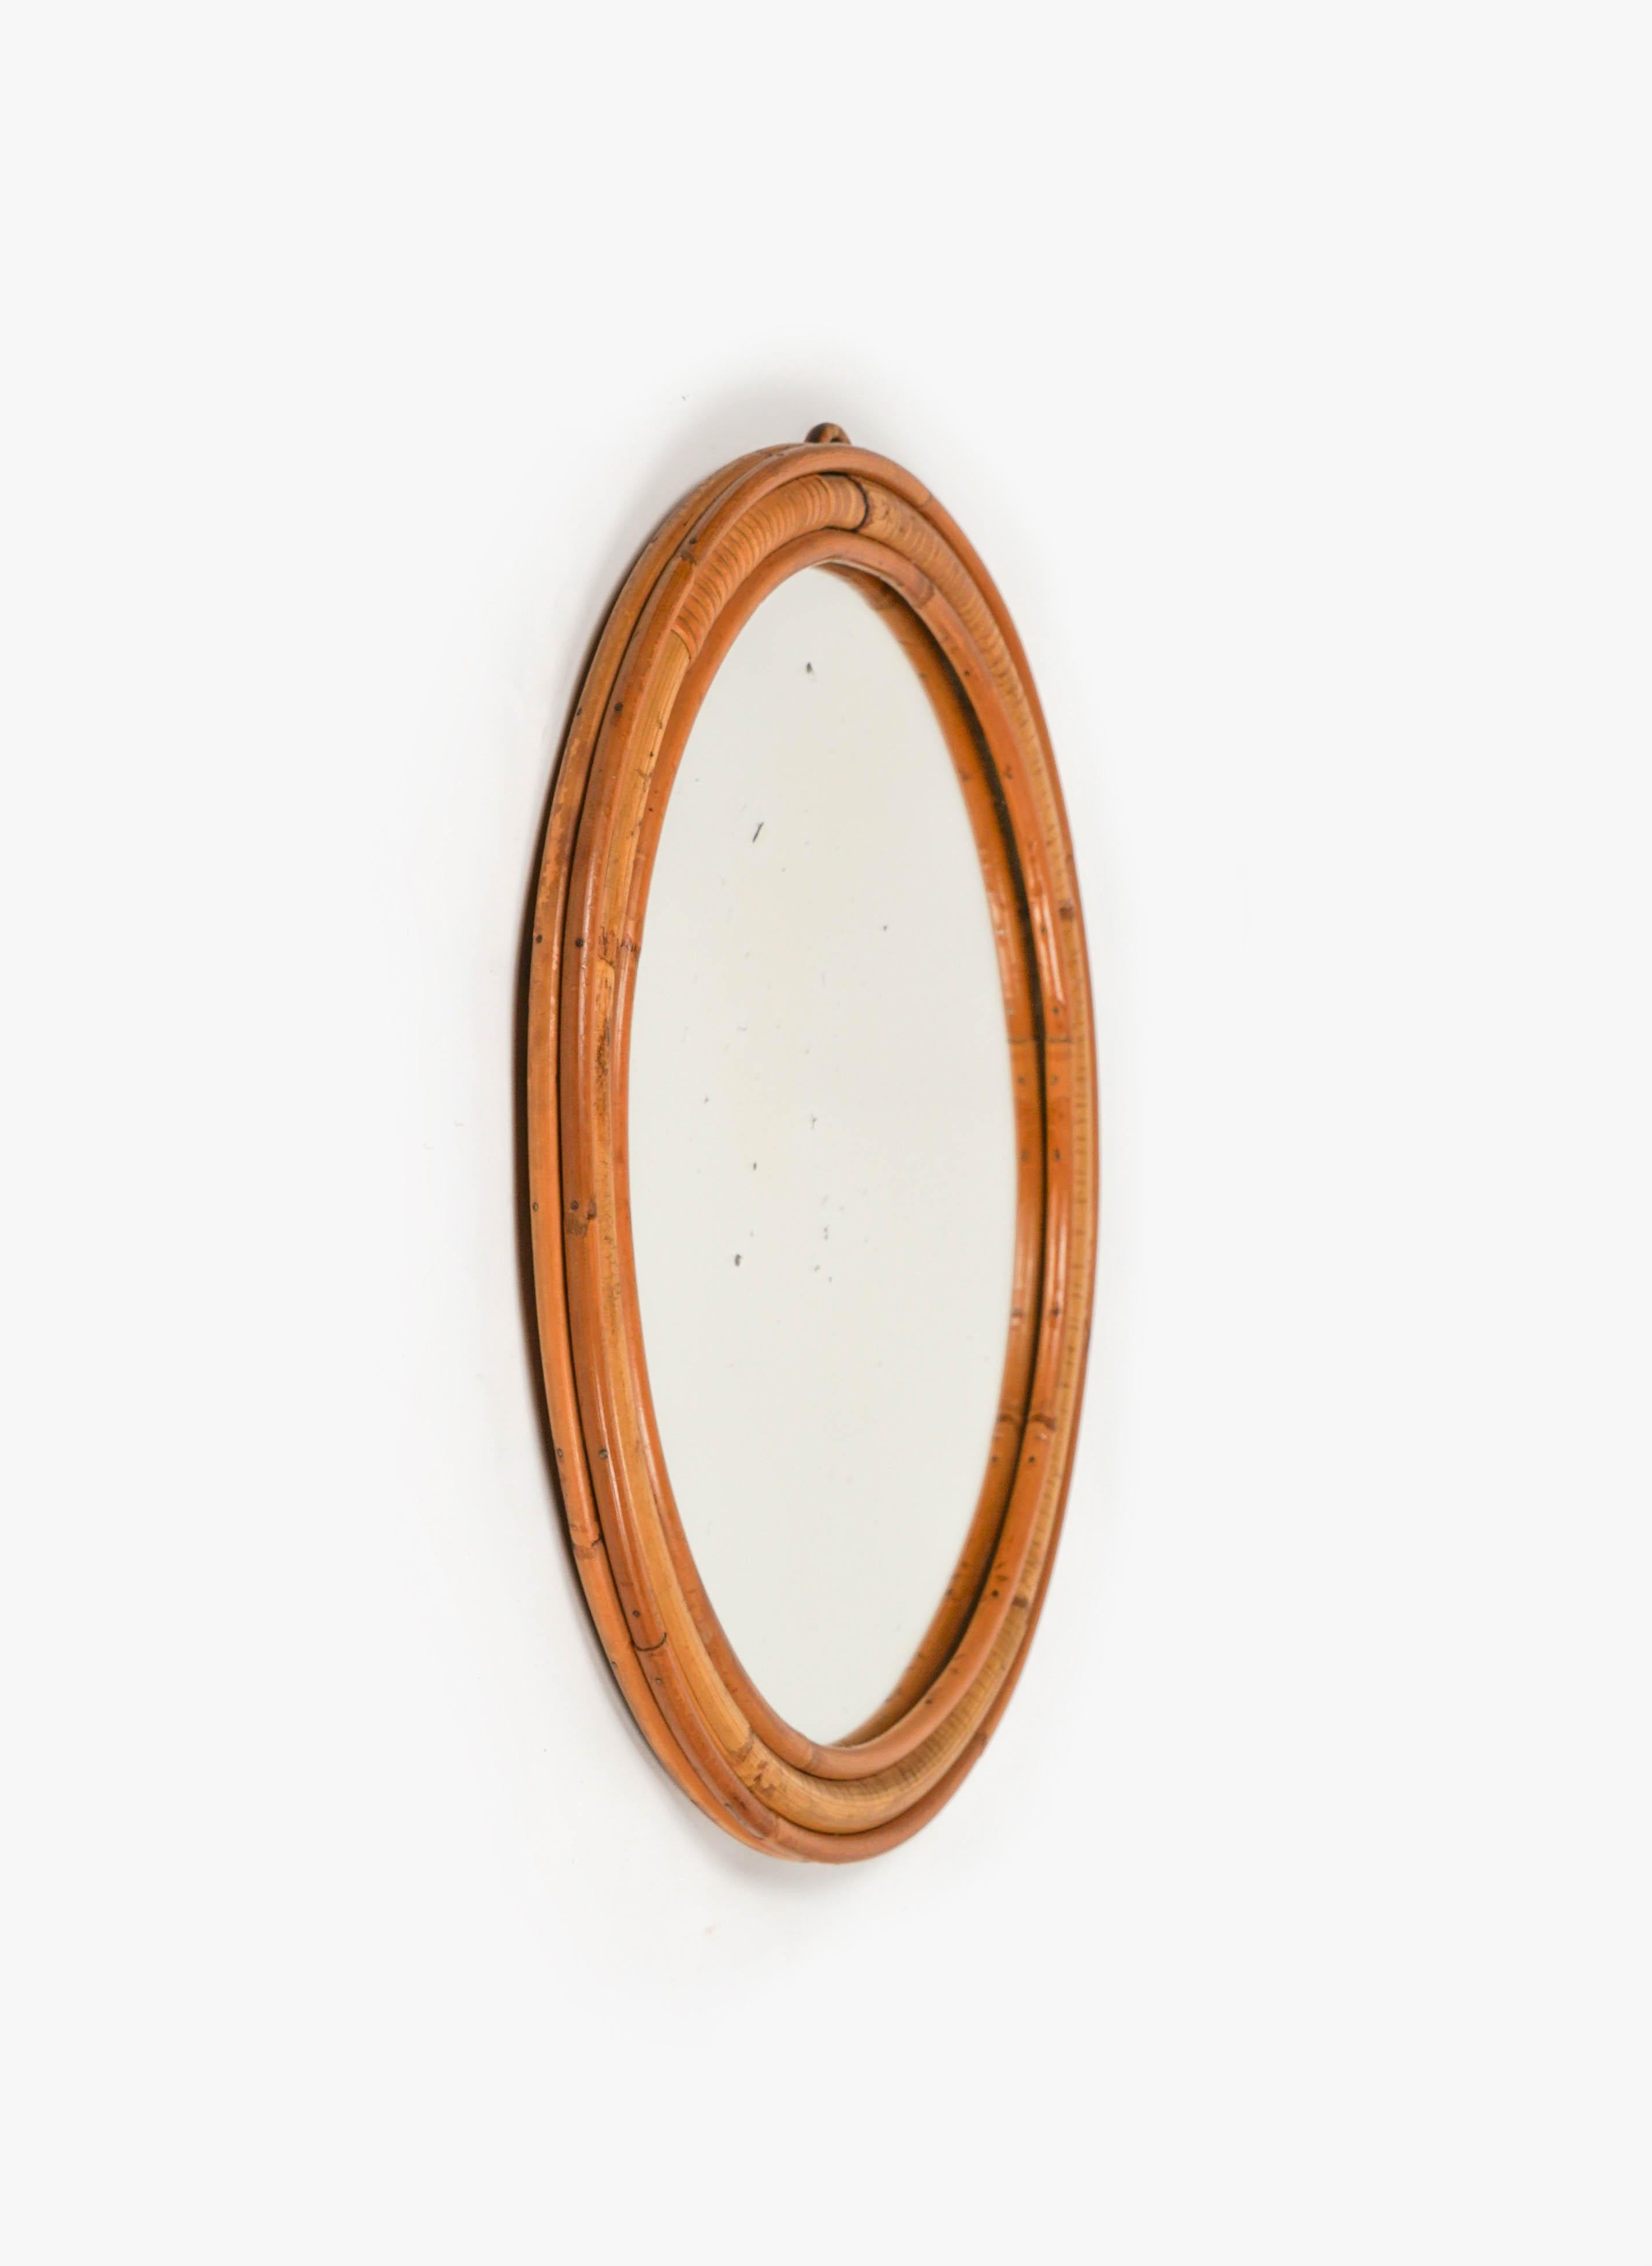 Midcentury Rattan and Bamboo Round Wall Mirror, Italy 1960s For Sale 1